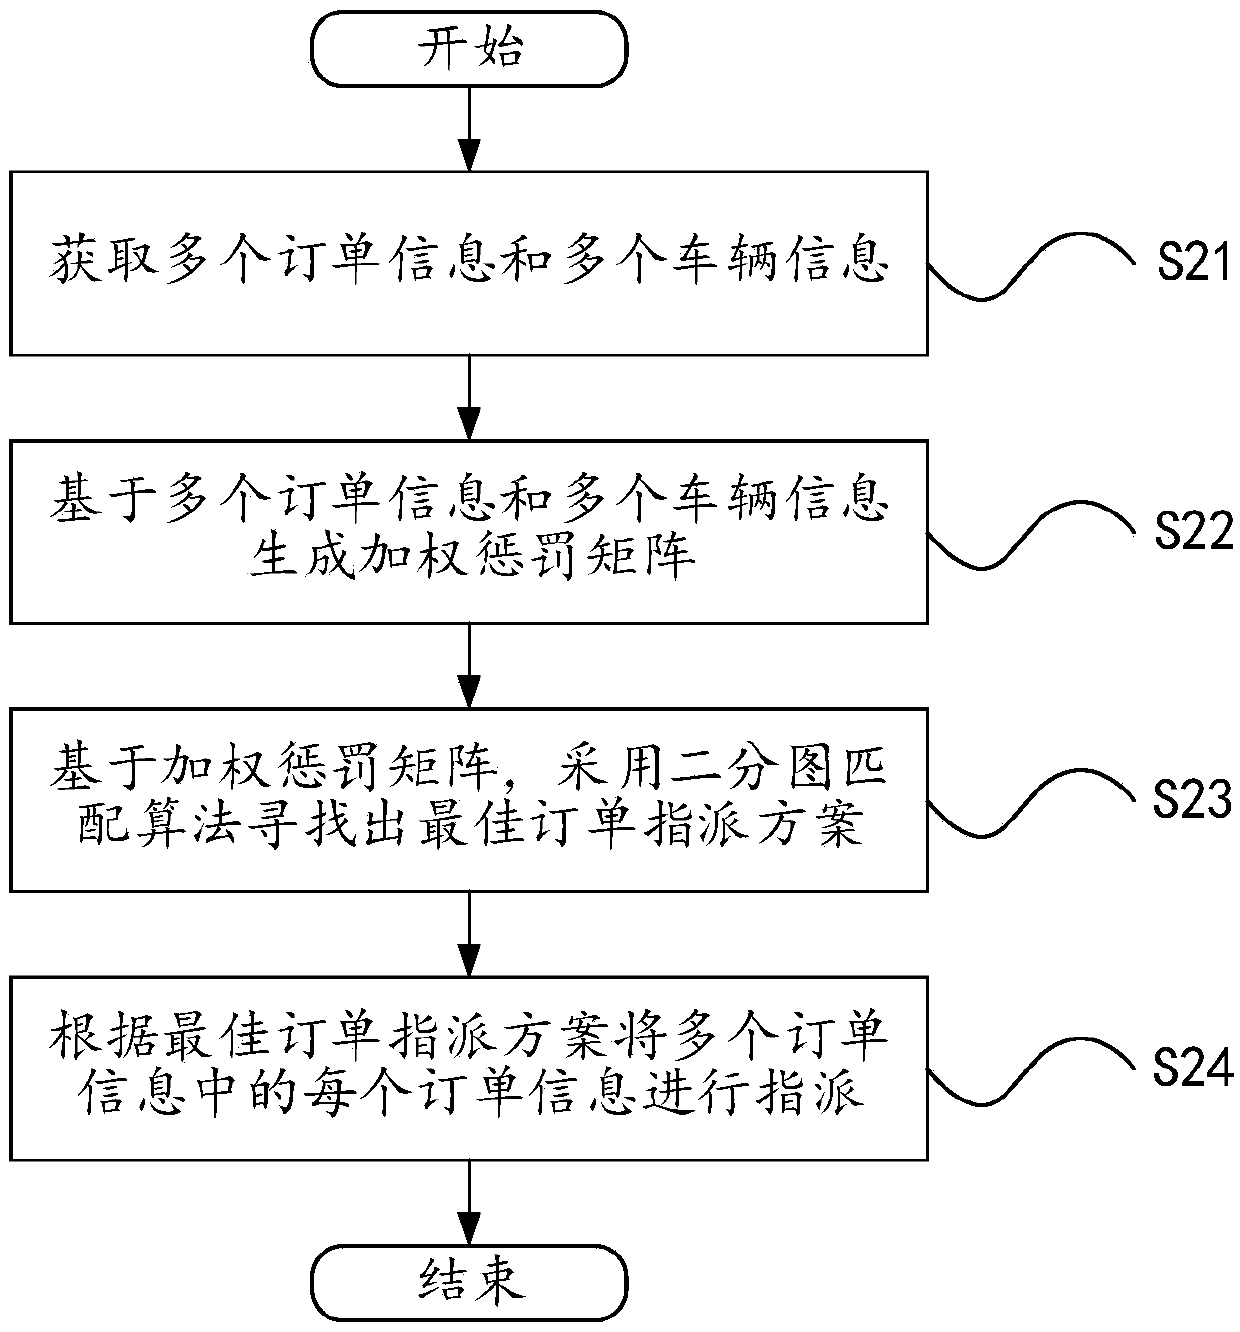 Vehicle scheduling method and device